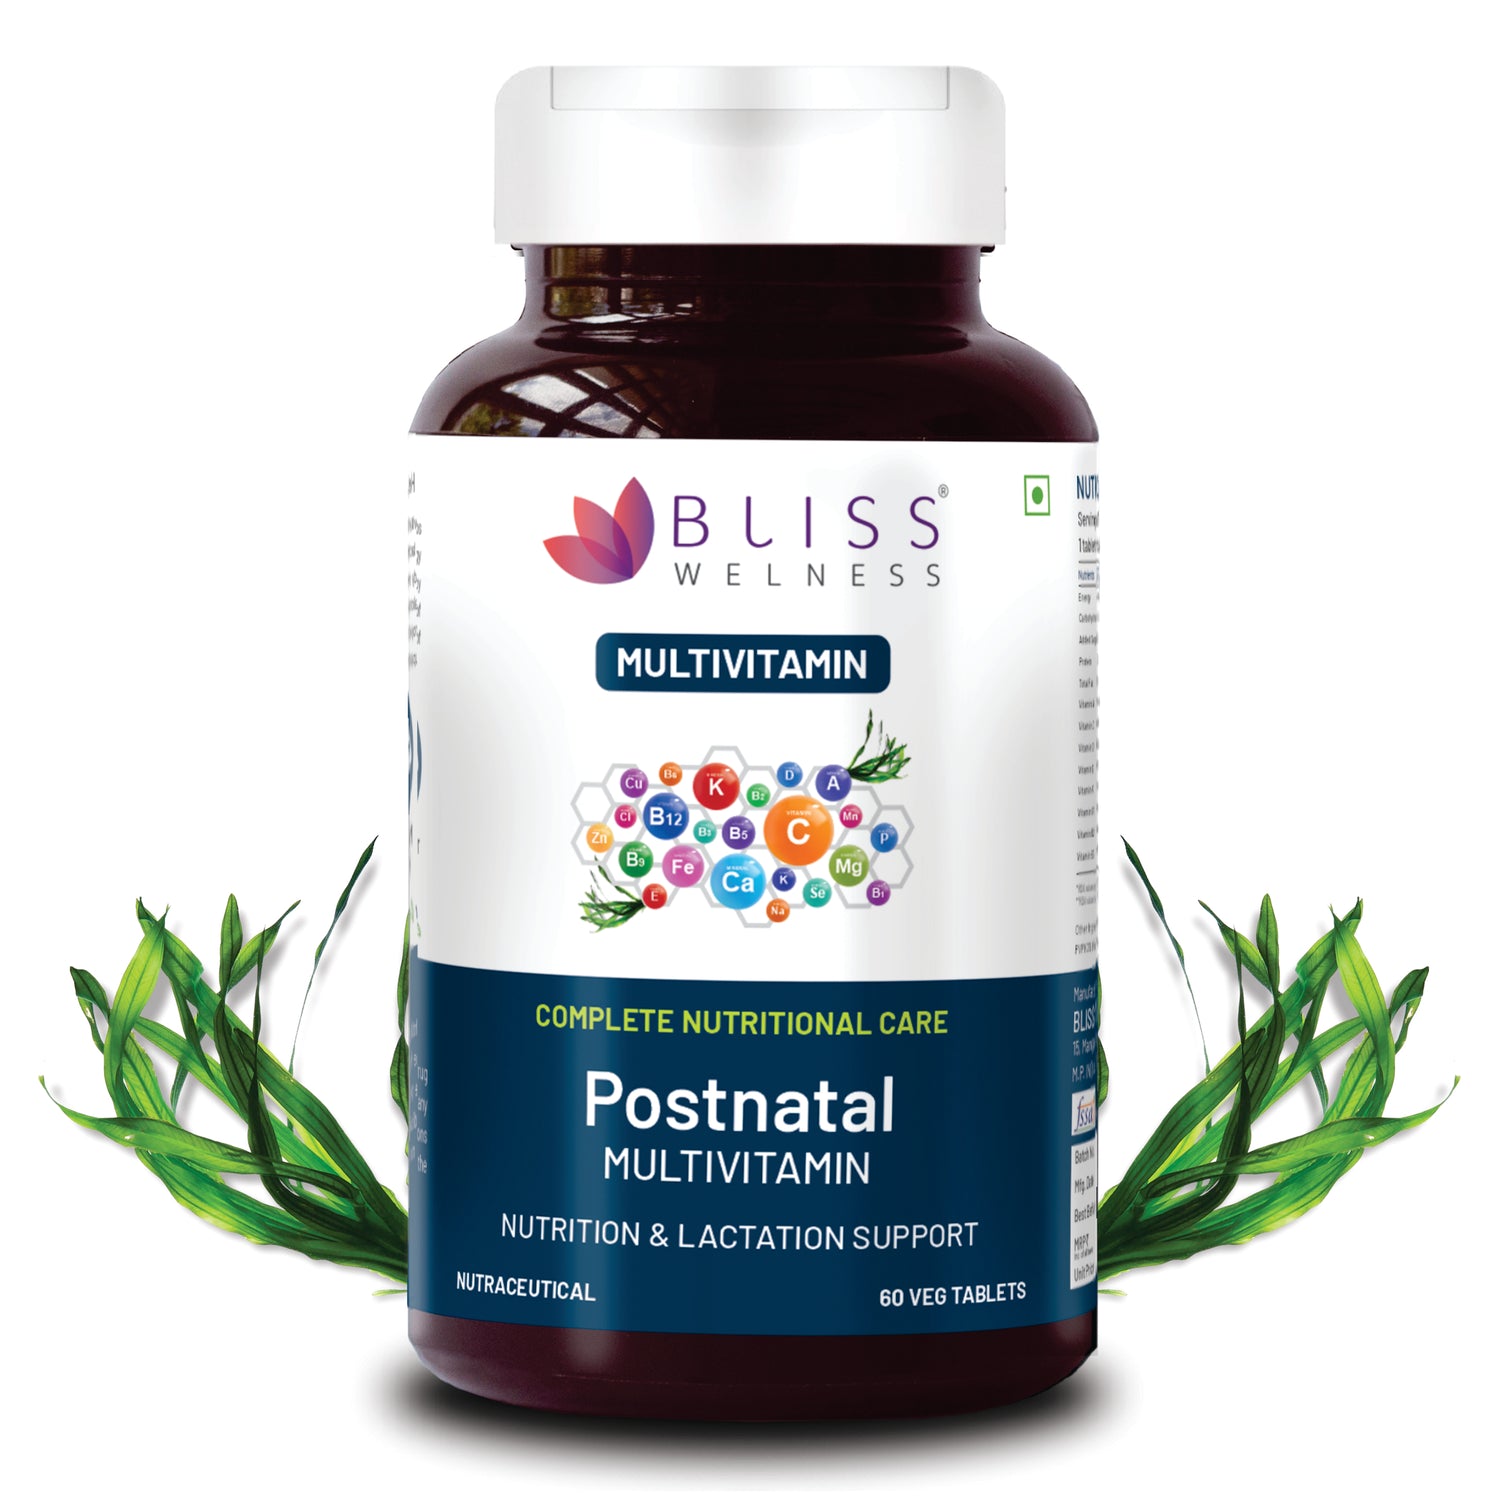 Boost Your Well-being: Buy the Best Multivitamin for Women - Bliss Welness